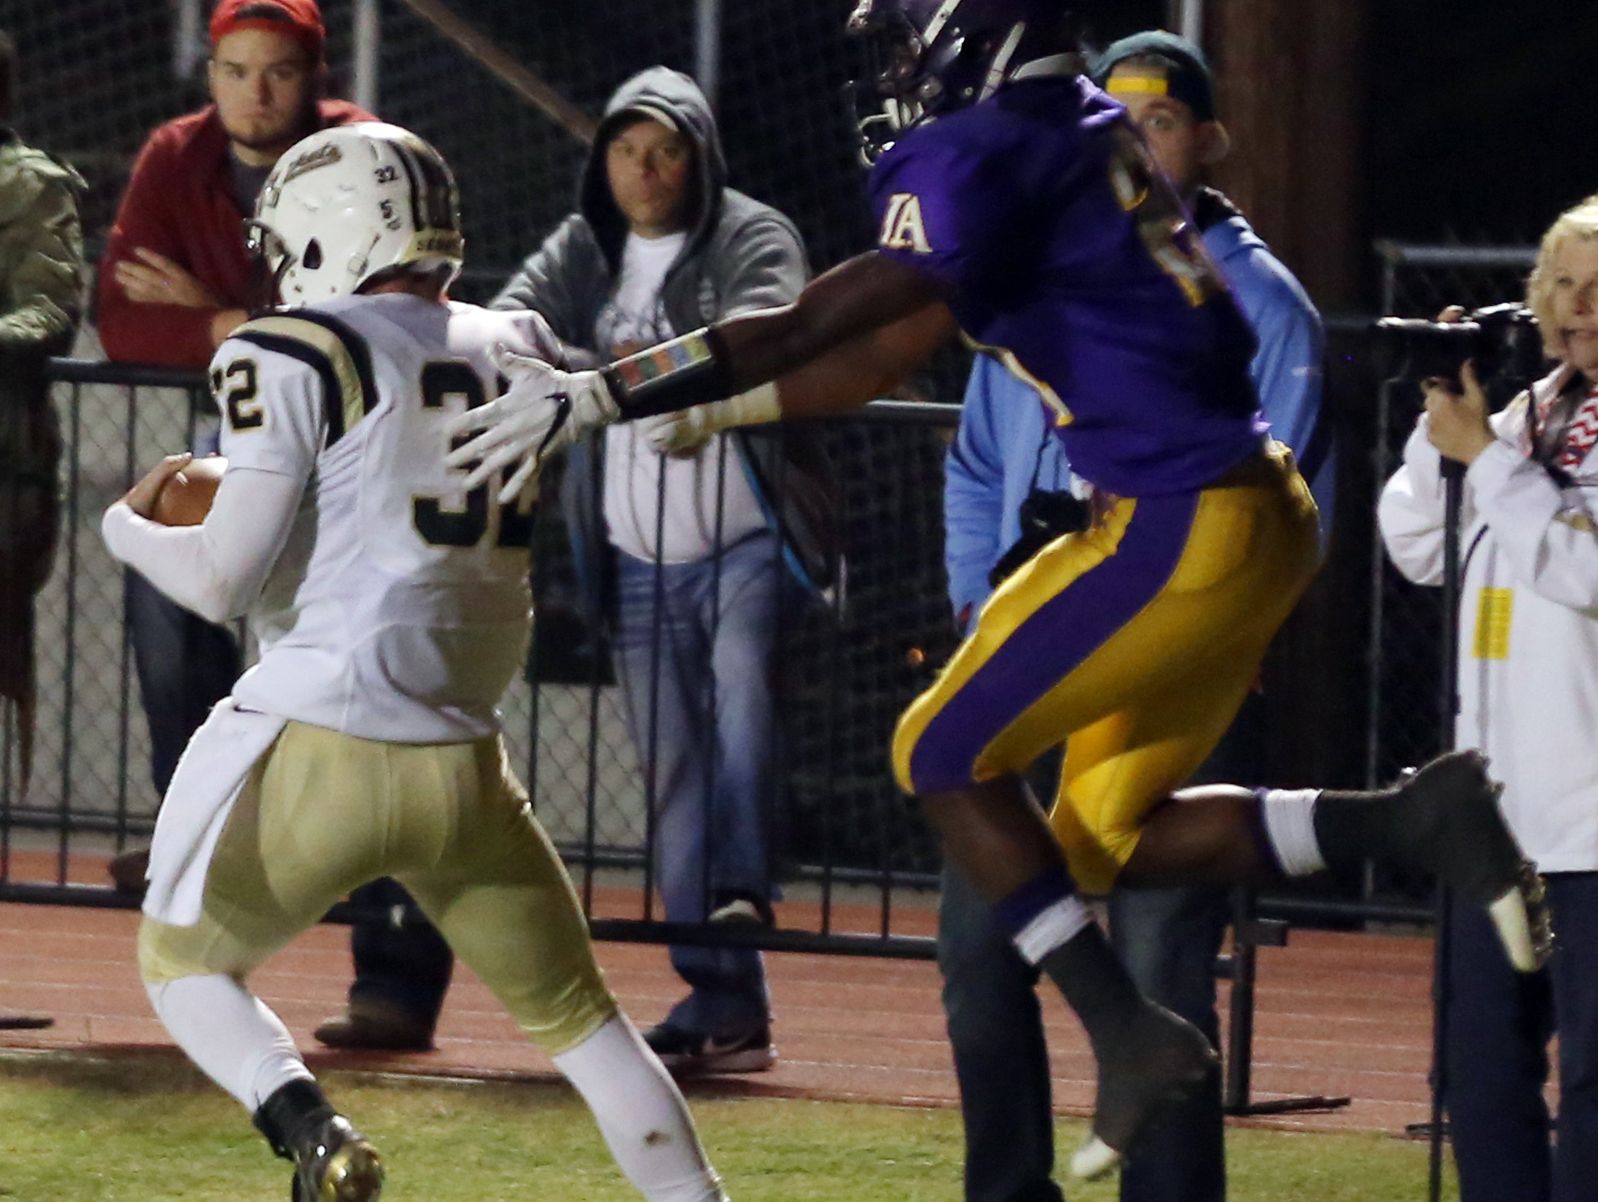 Springfield's Bryan Hayes intercepts a pass intended for Lipscomb Academy's William Phillips during their playoff game at Lipscomb Academy Friday November 4, 2016.